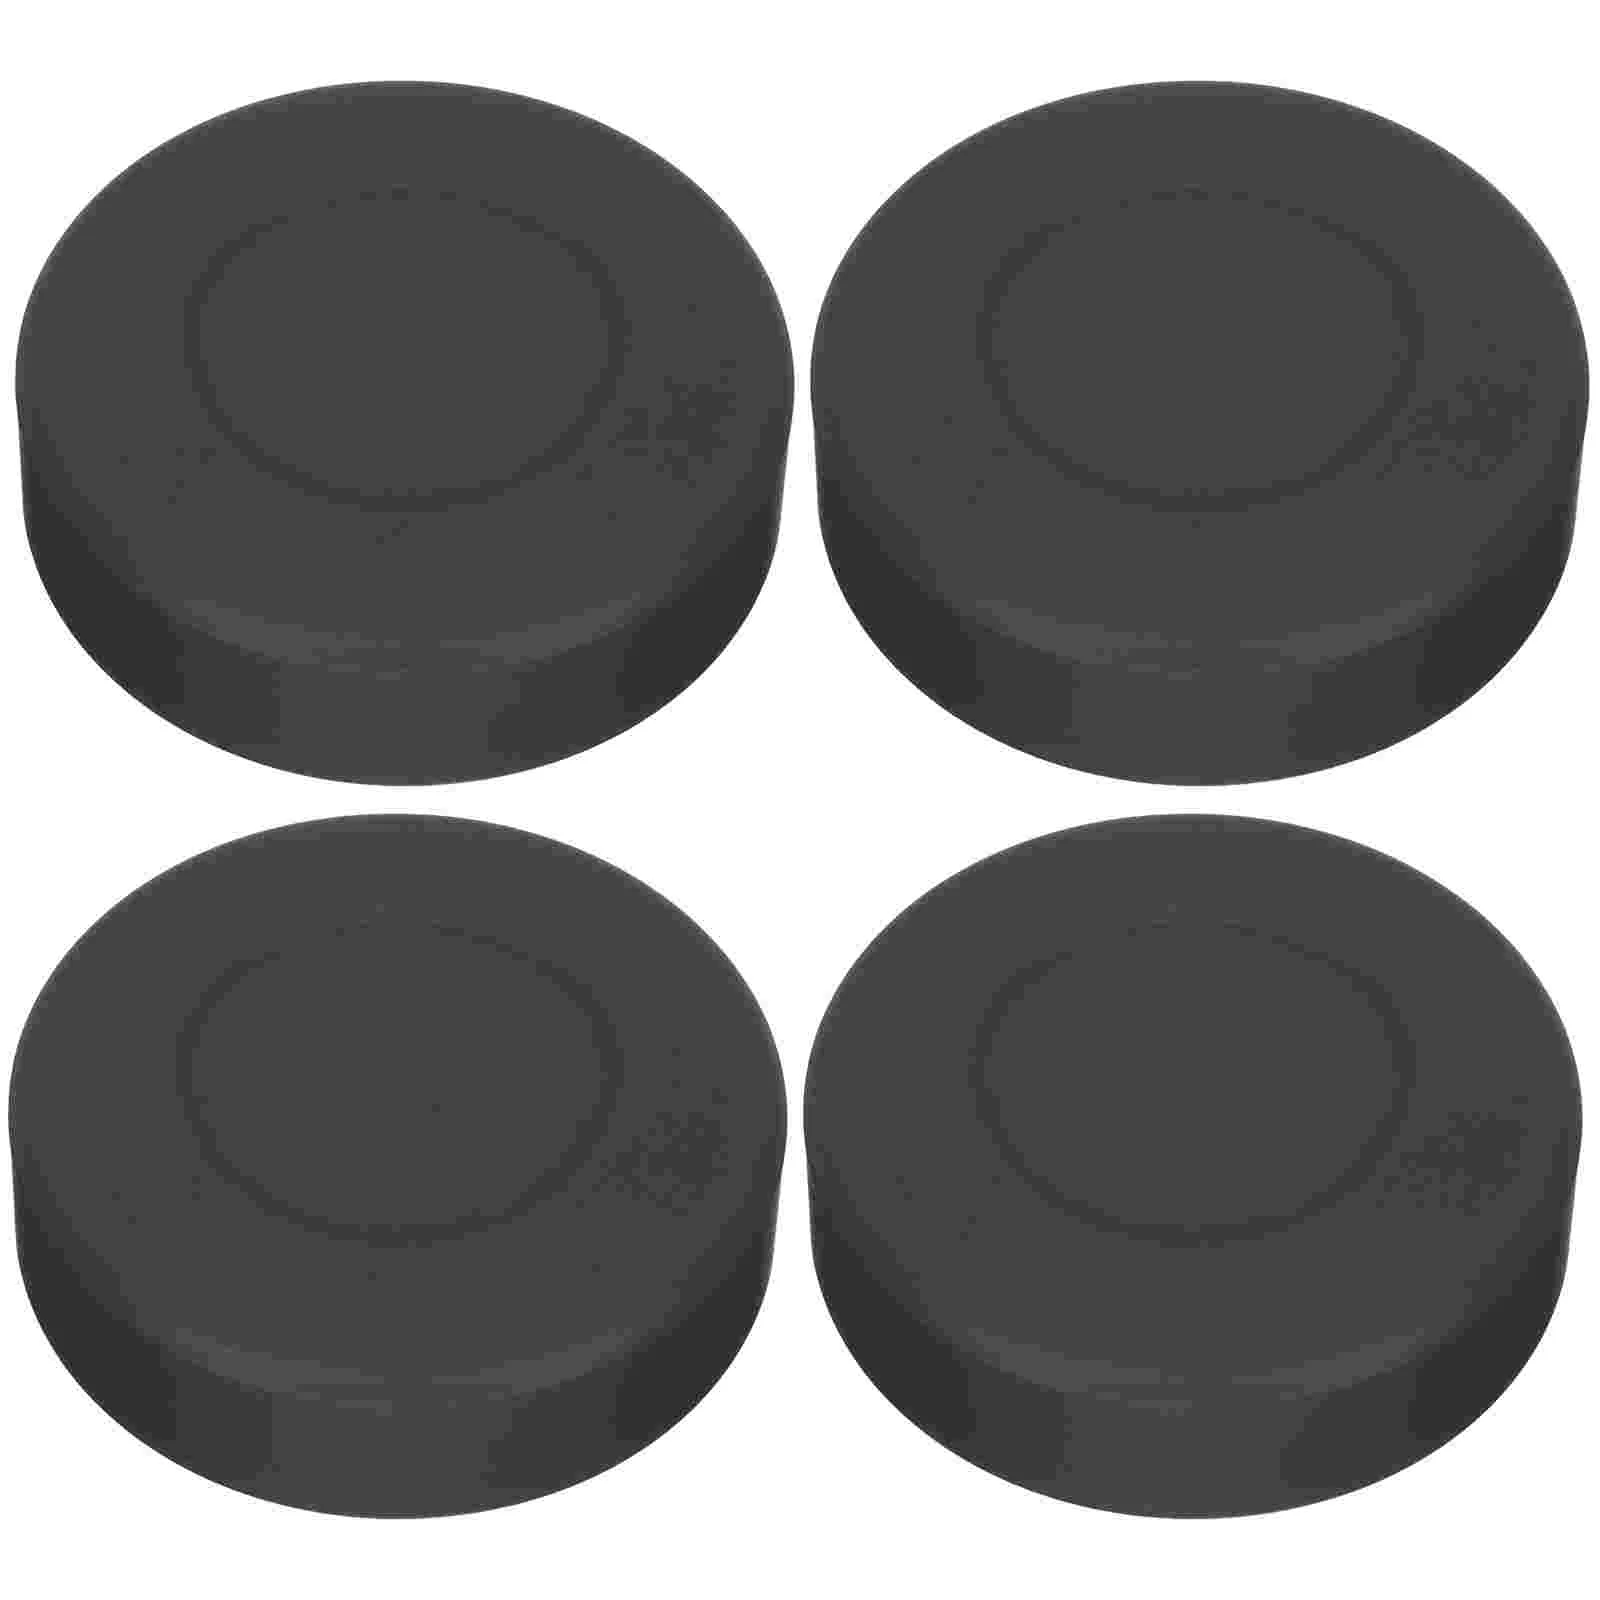 

Component Ice Hockey Race Puck Official Regulation Pucks Training Supplies Practicing Accessory